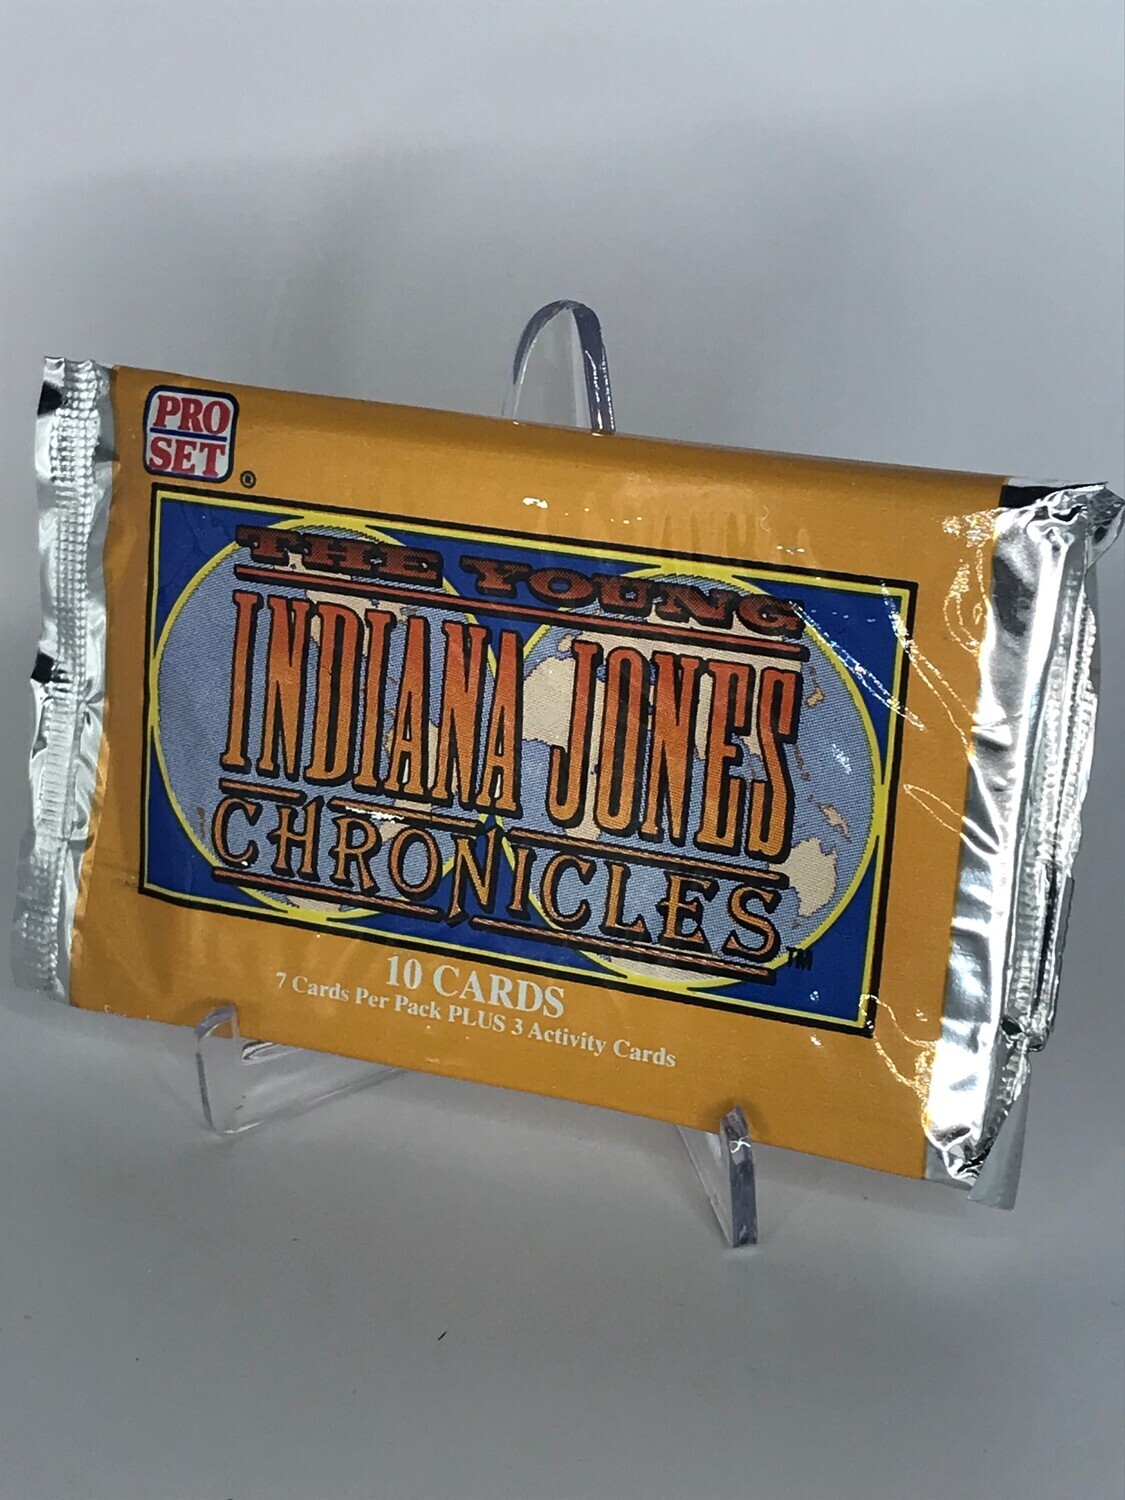 The Young Indiana Jones Chronicles Hobby Box (1992 Pro Set) - Pack